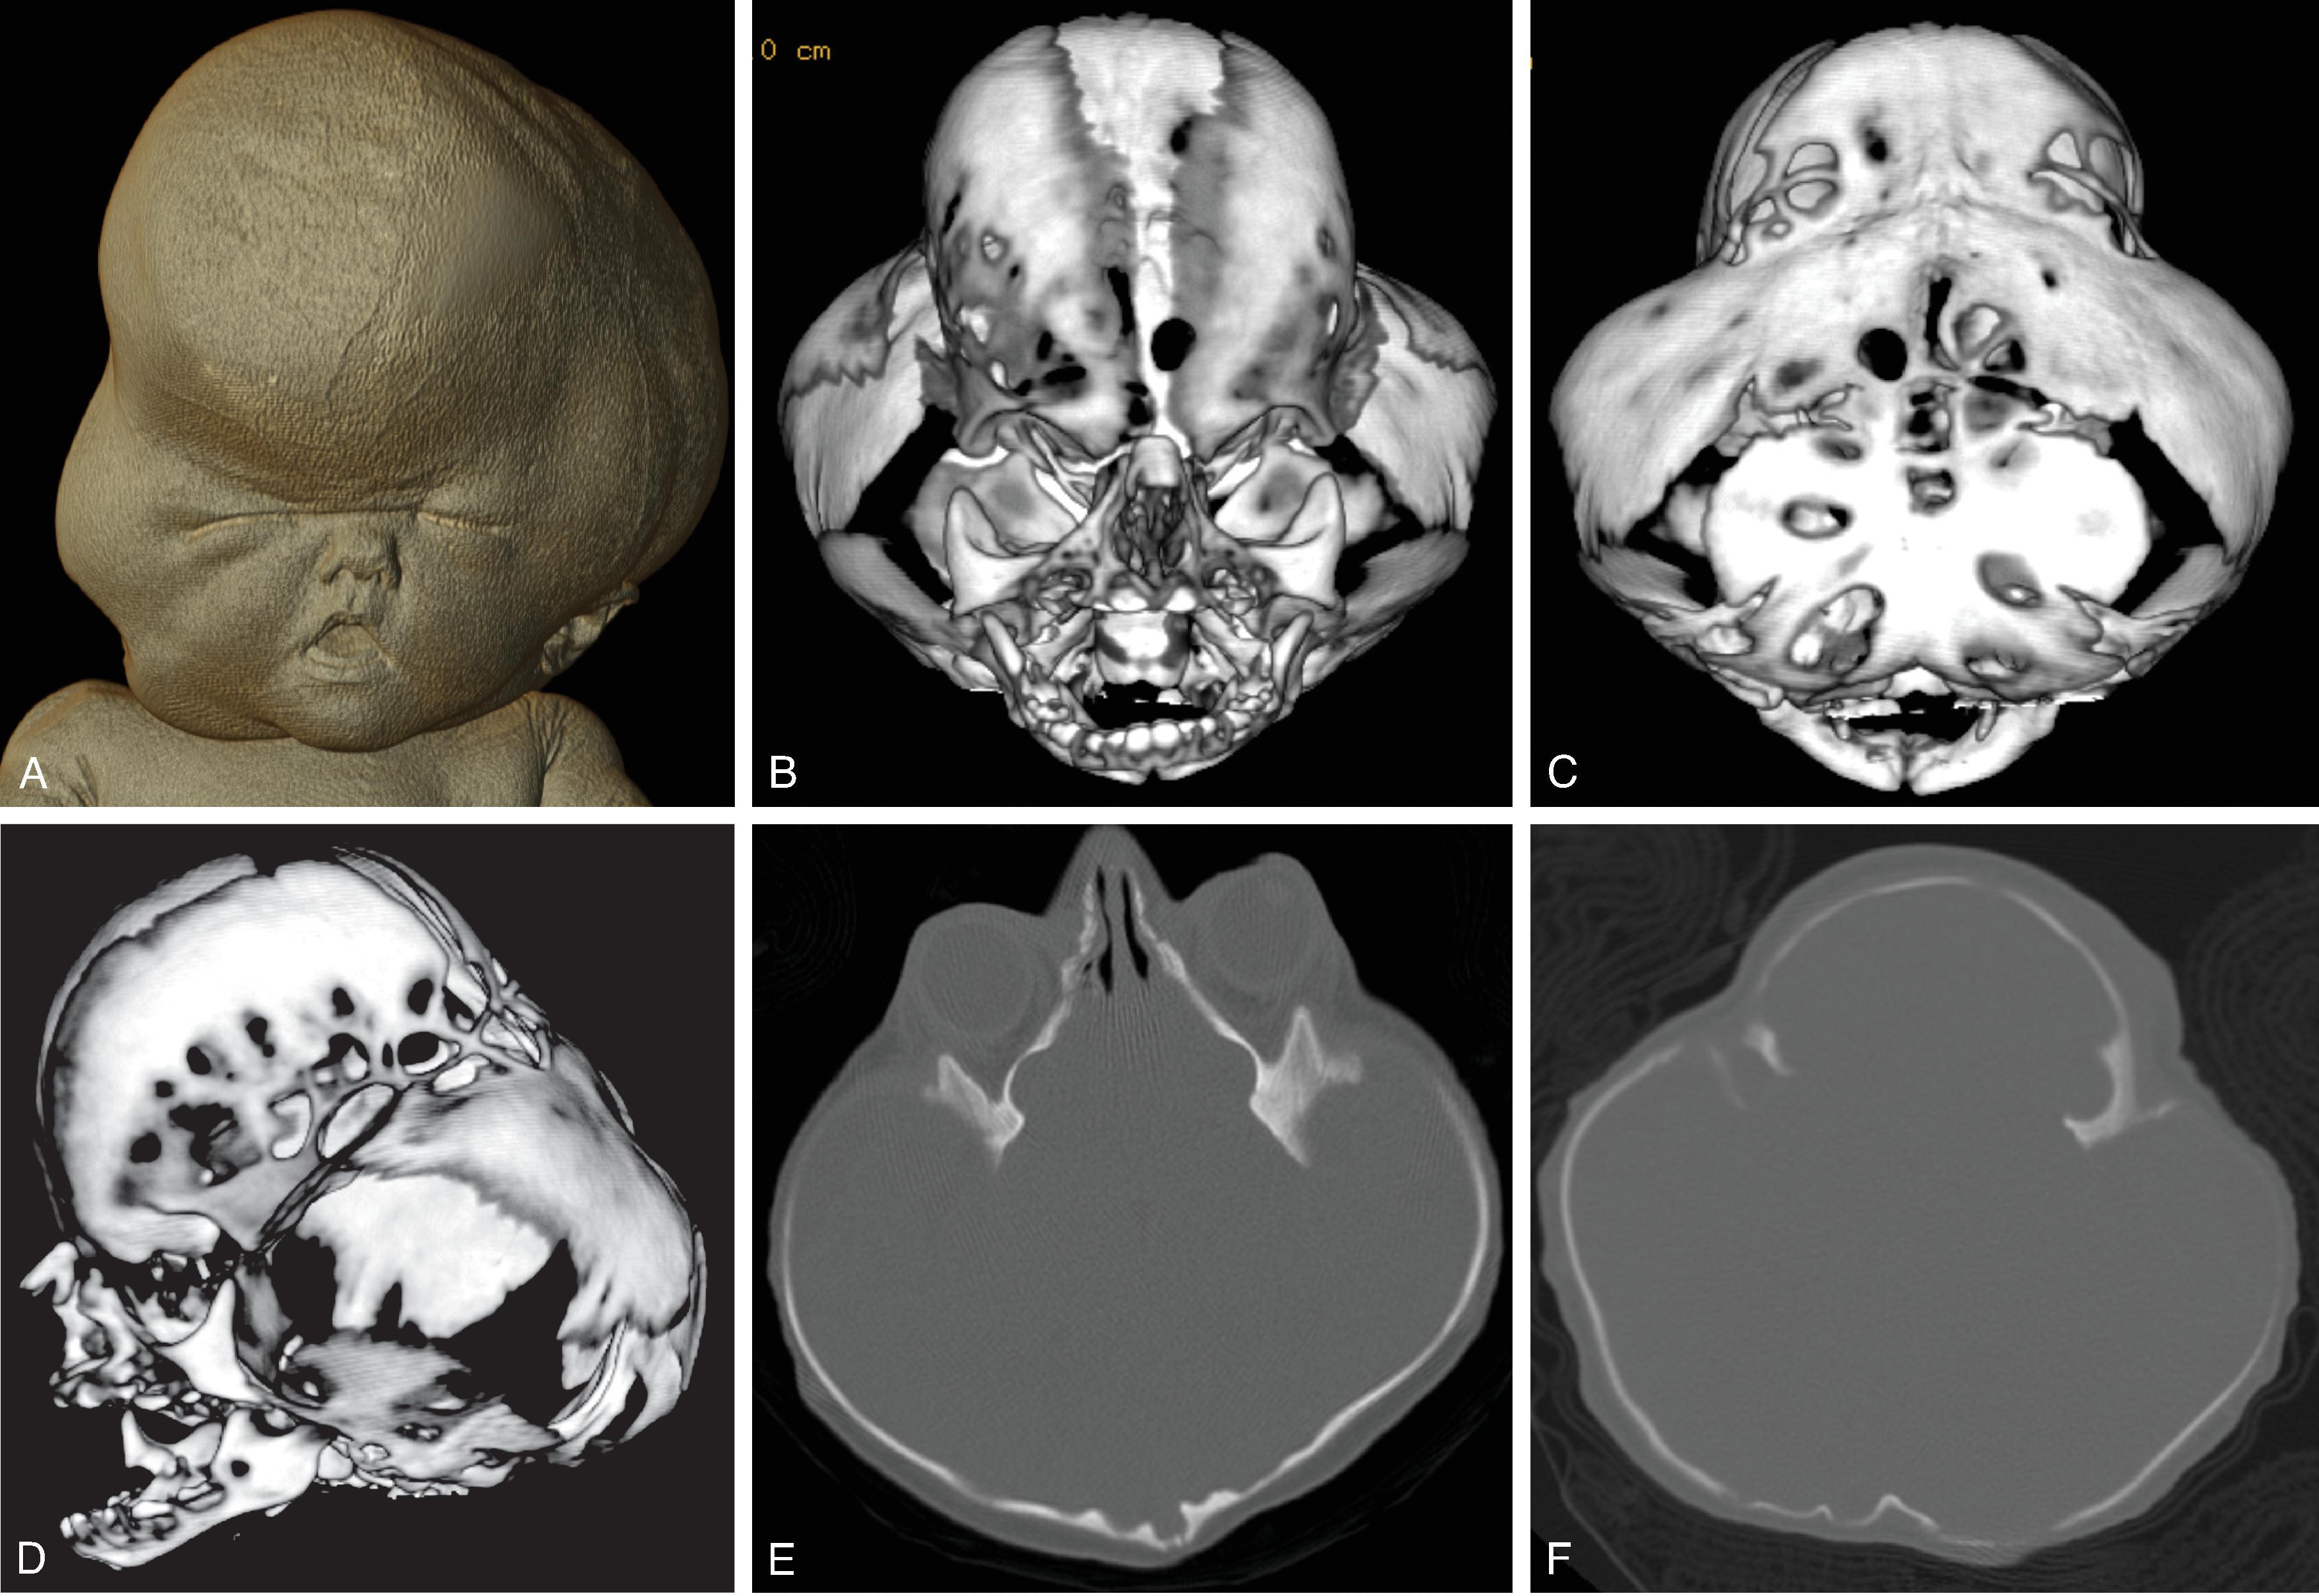 Fig. 12.15, Micrognathia . (A) Sagittal T2W image of micrognathia, retrognathia, and glossoptosis in a patient with Pierre-Robin sequence. (B) Sagittal T2W fetal image in a different patient demonstrating the inferior facial angle is abnormally low measuring 39º. (C) Axial T2W fetal image demonstrating the AP diameter (dashed line) of the mandible in a patient with micrognathia.